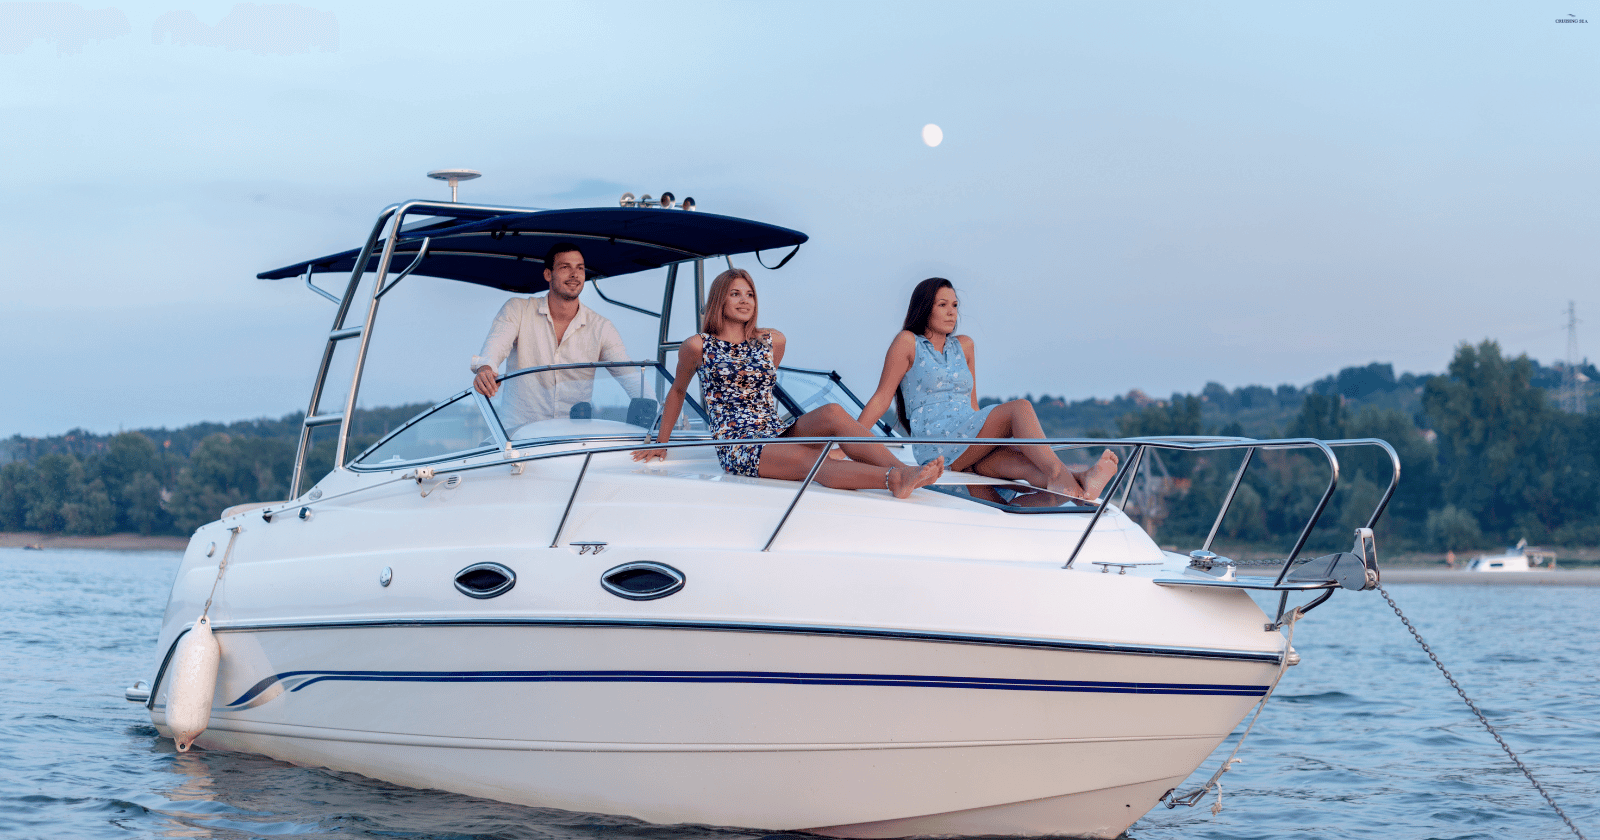 How to prevent boating accidents